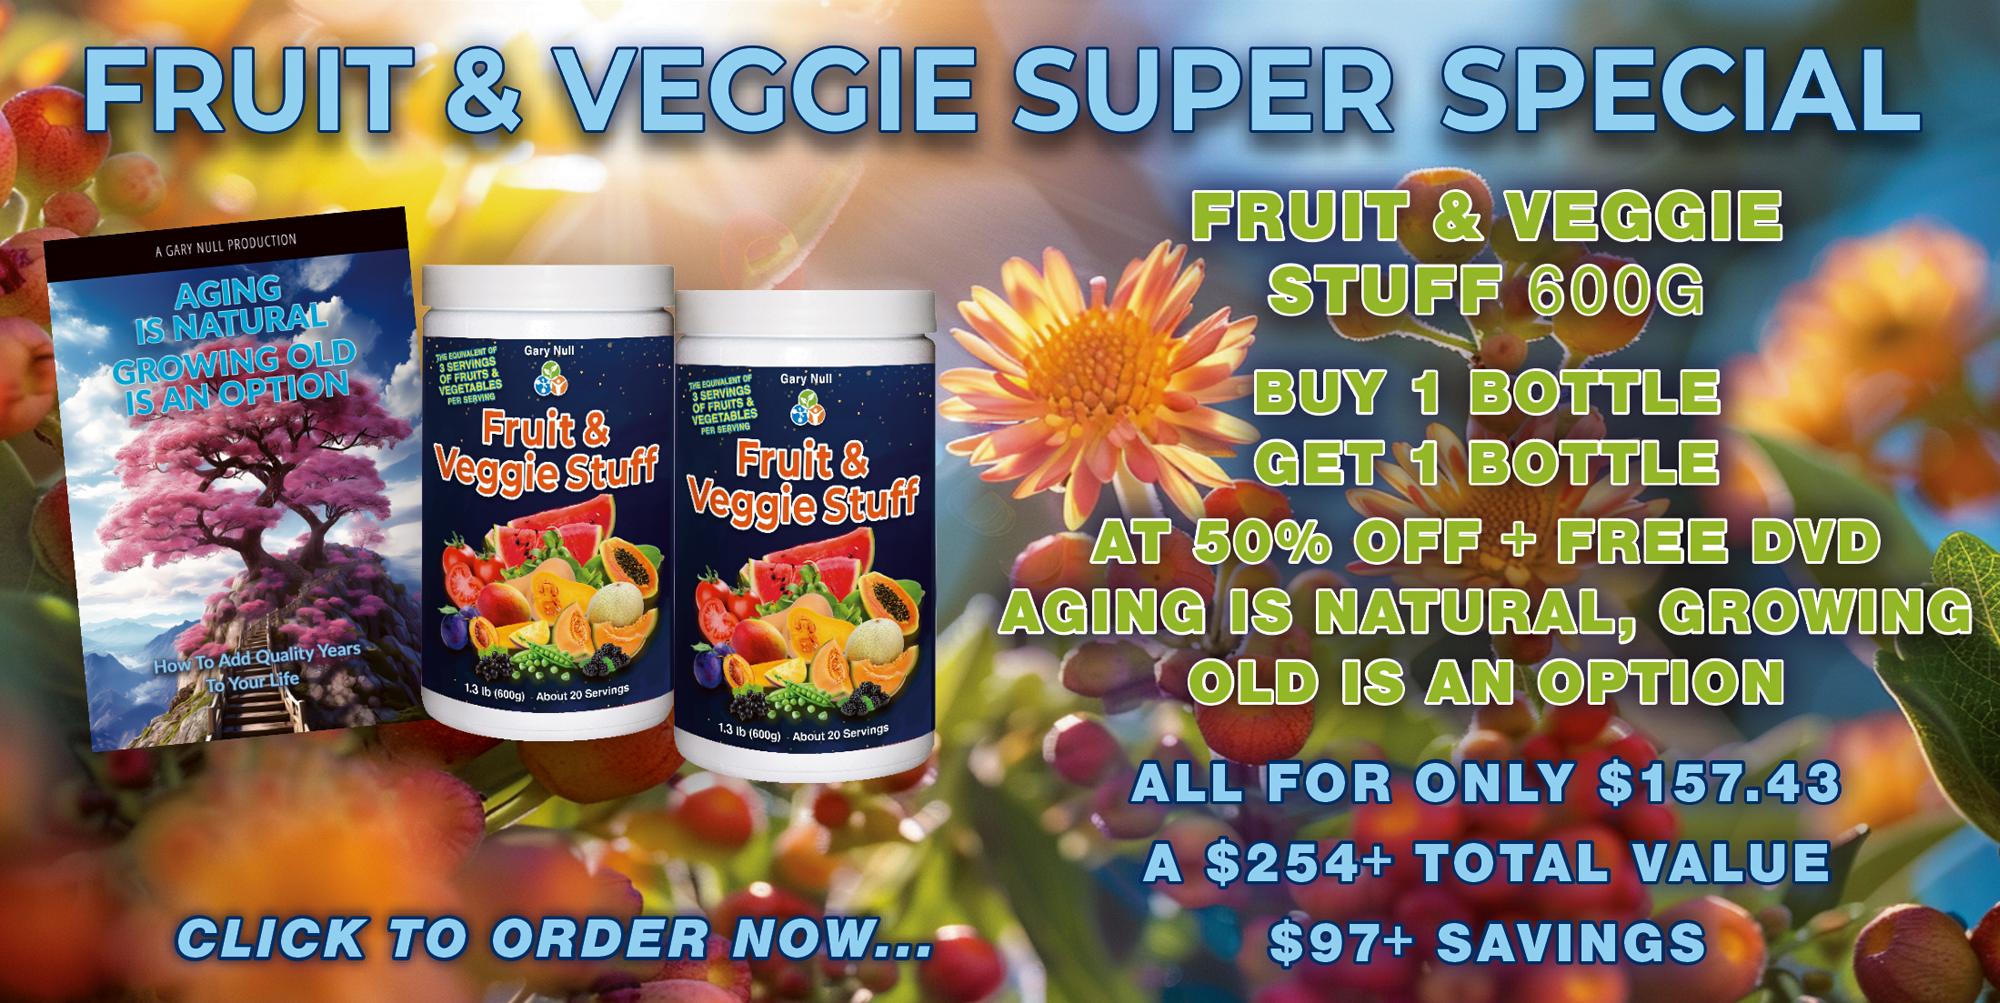 Fruit and Fiber Special: Buy 1 Get 1 50% Off + FREE DVD